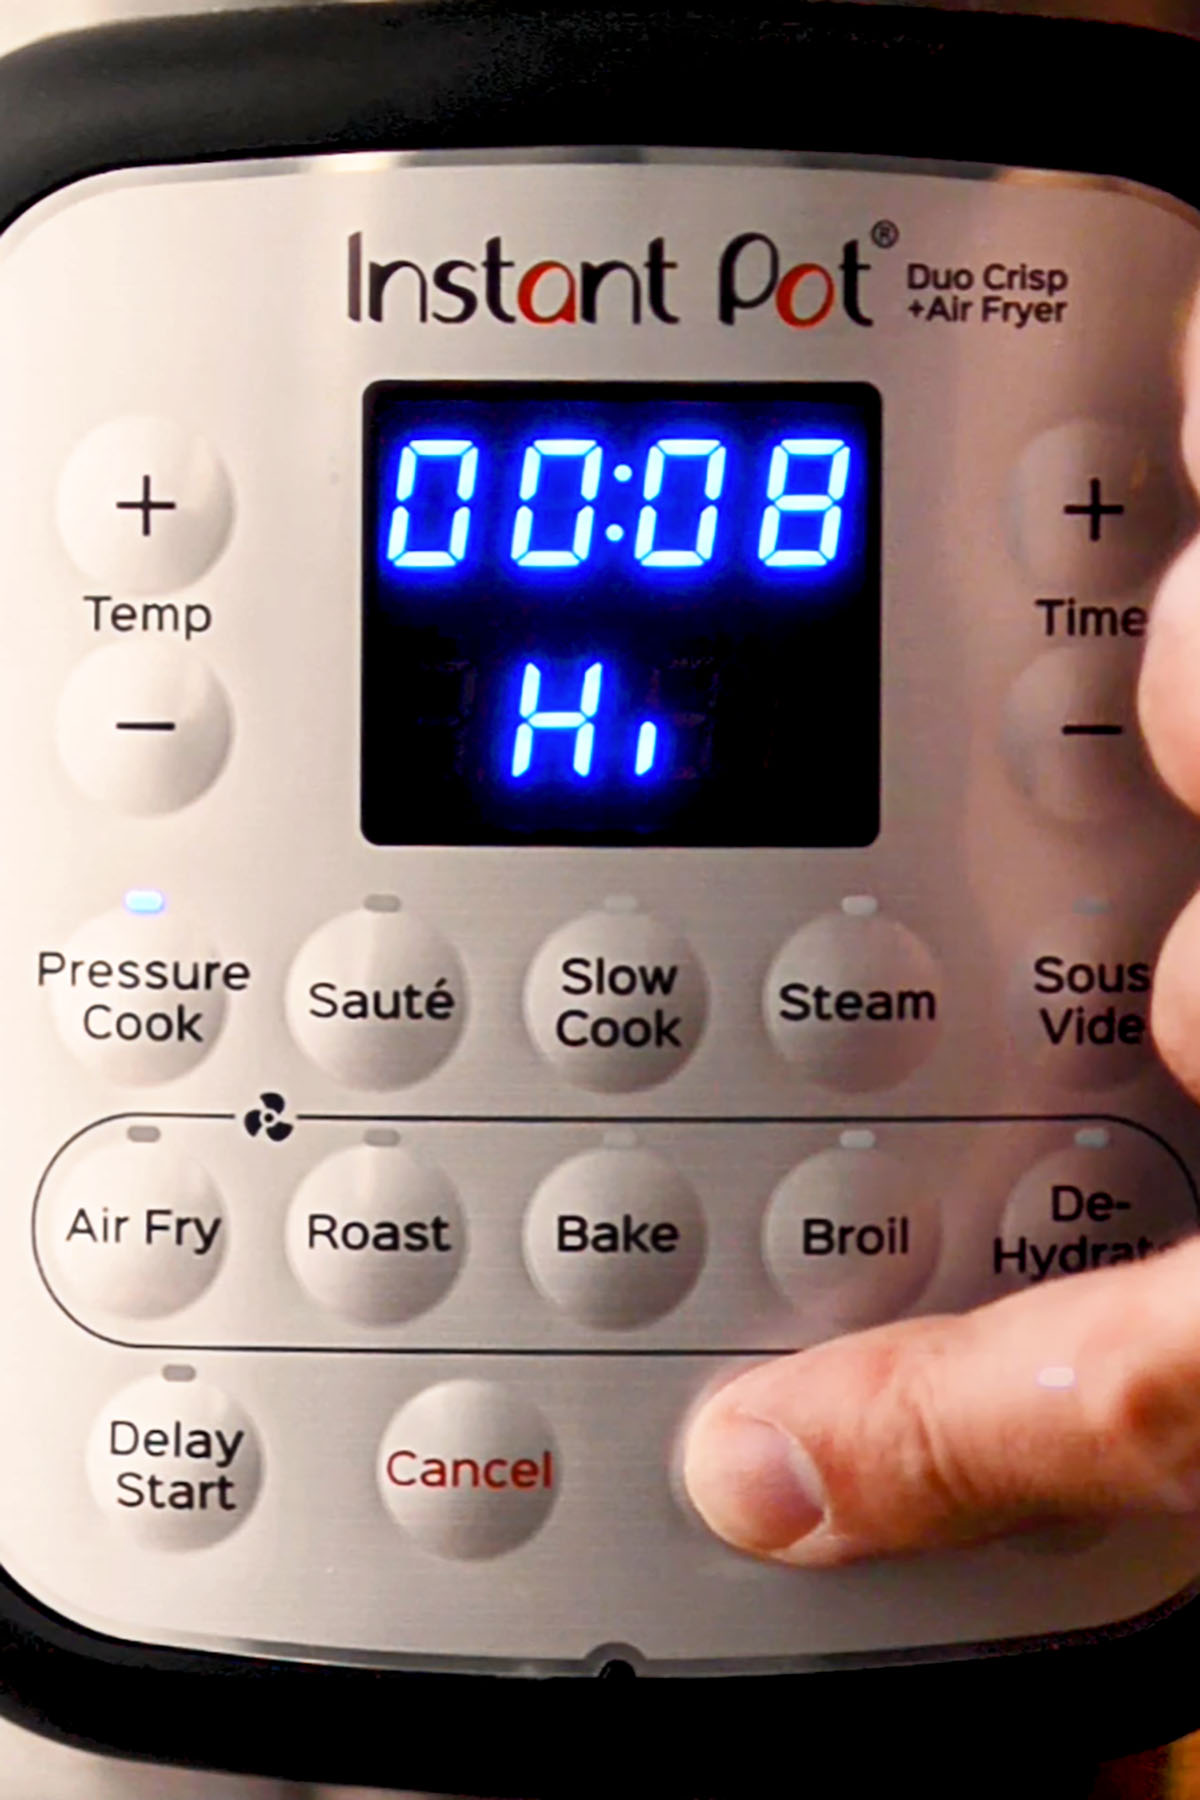 An Instant Pot set to pressure cook on High for eight minutes.